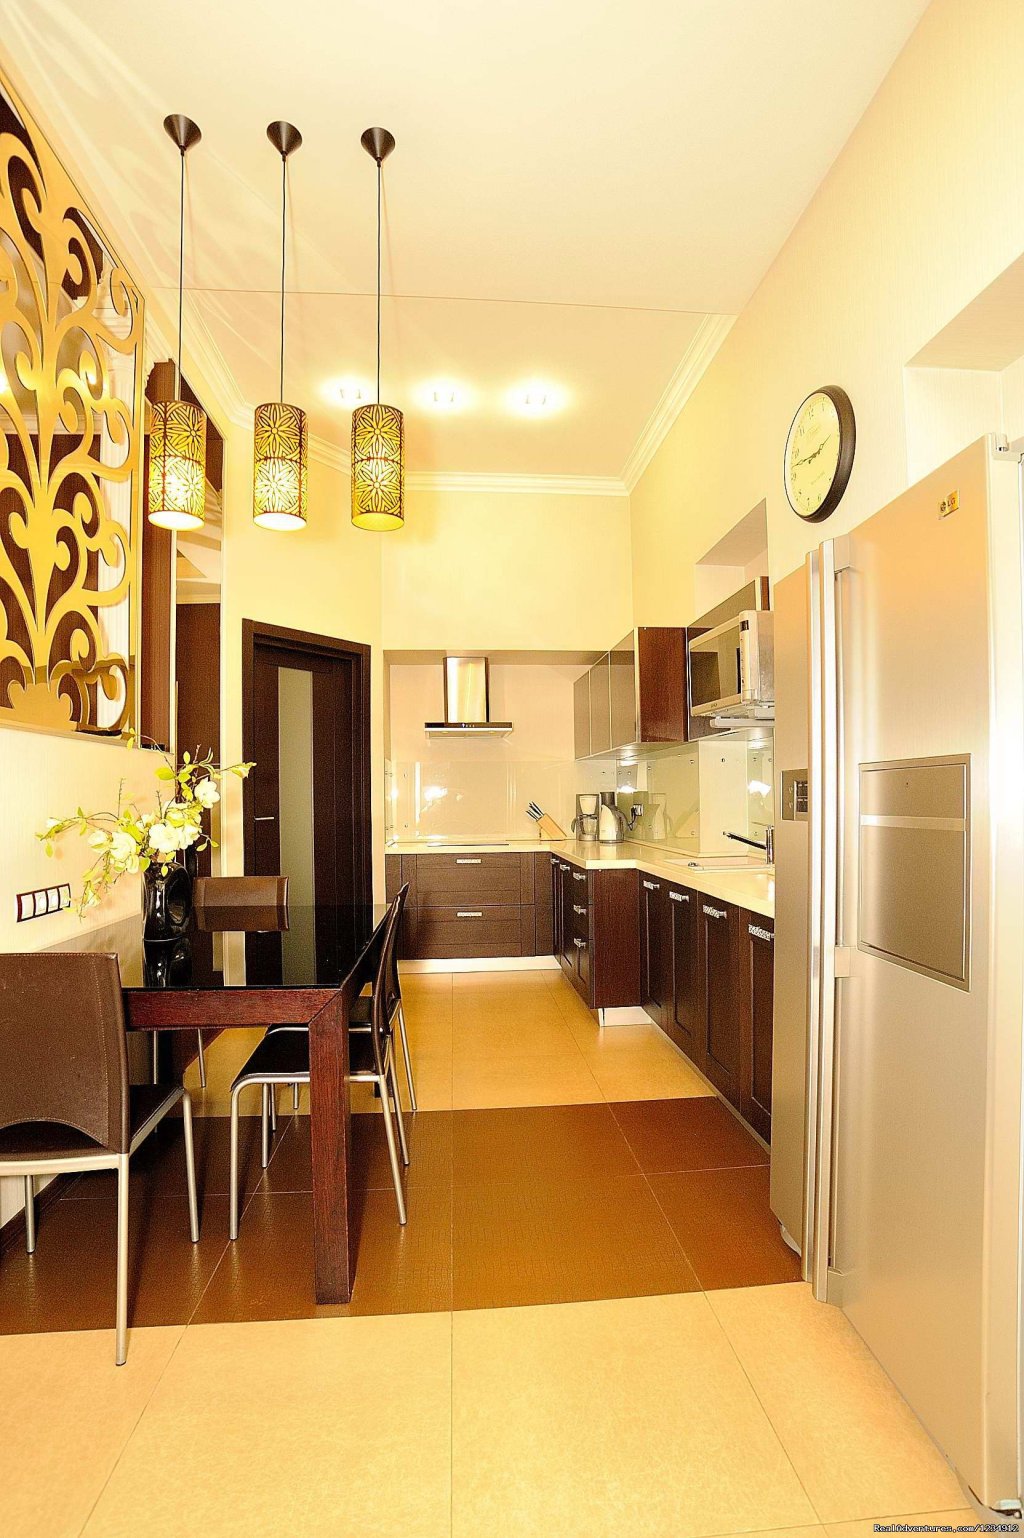 VIP 3room/2 bedroom apartment in the heart of Kiev | Image #10/24 | 